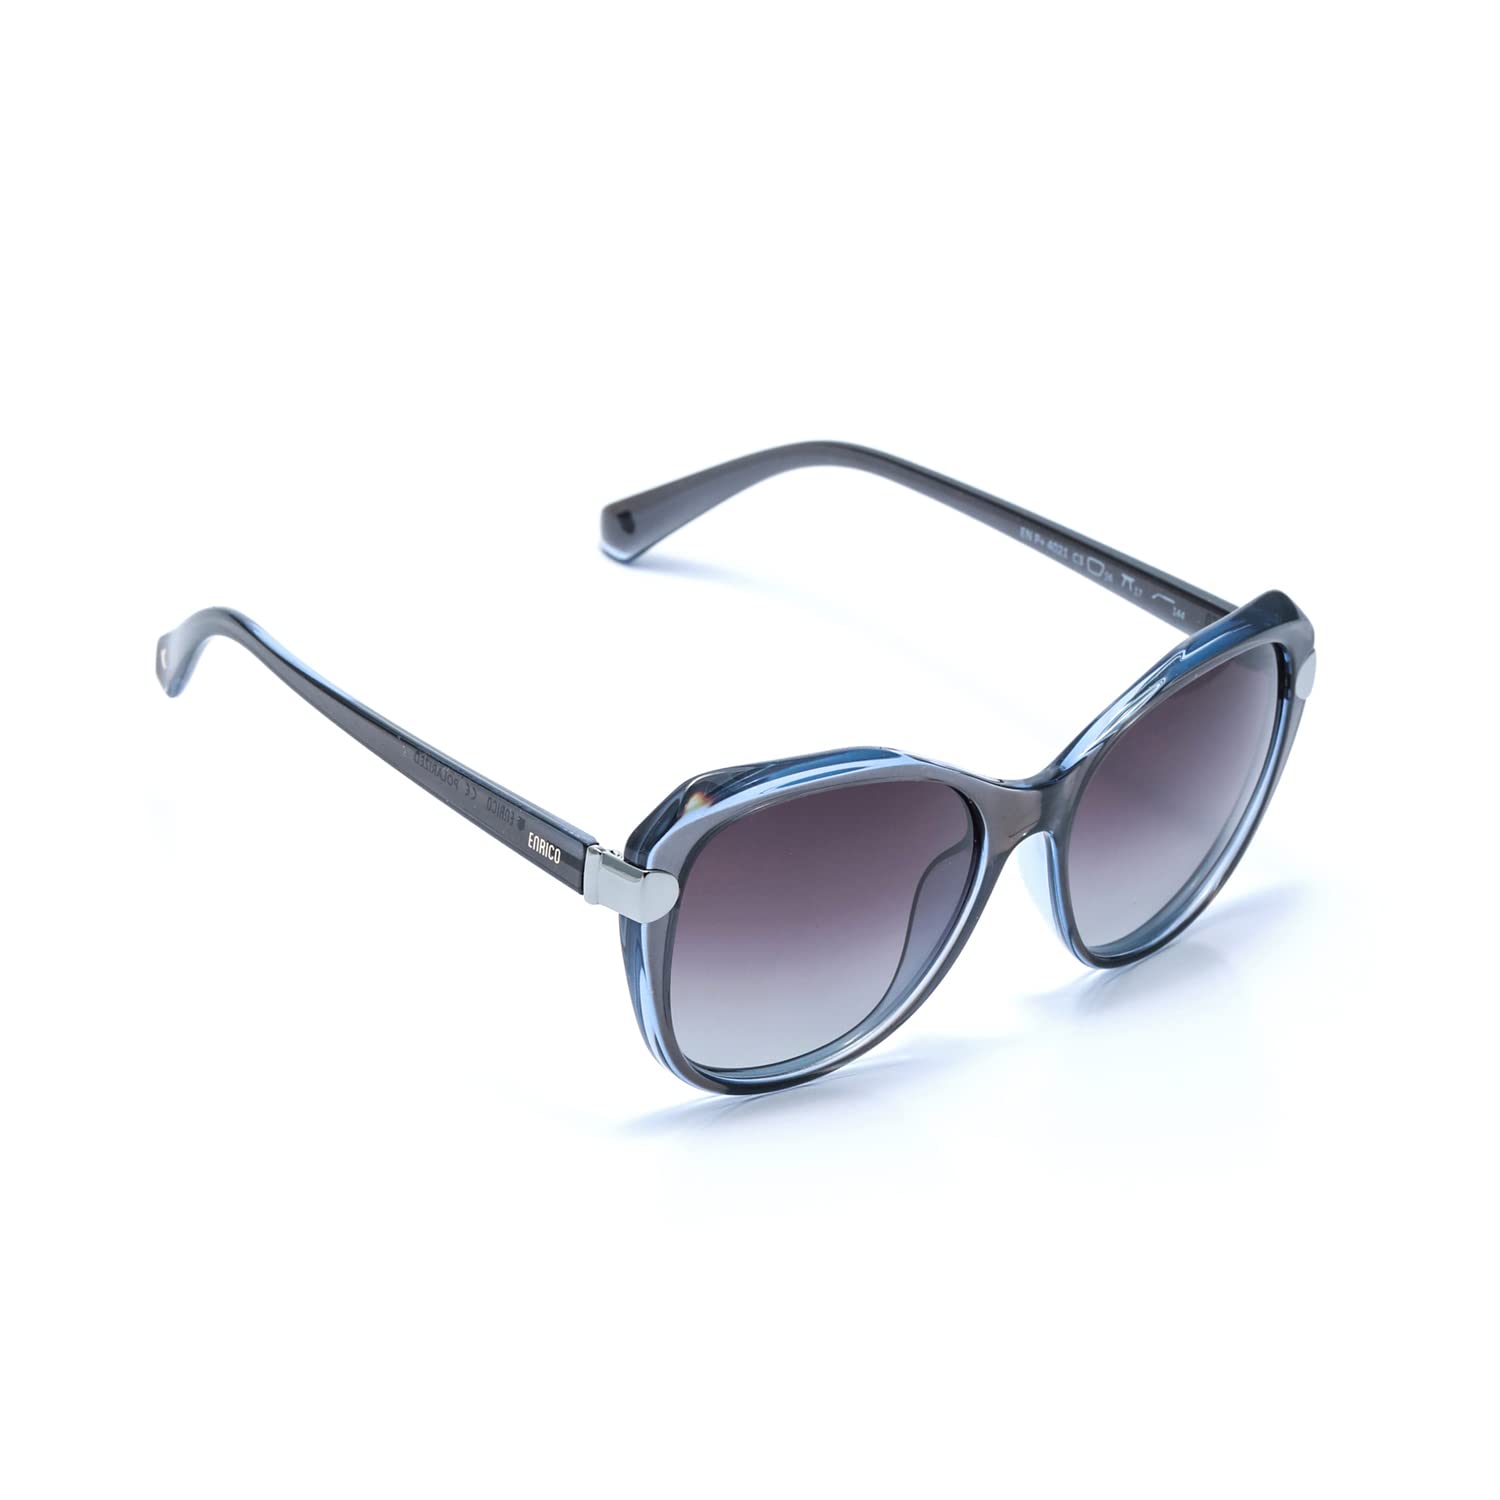 ENRICO Overjoyed Sunglass with Grey Rectangle Frames | Black - Color Polycarbonate Material |Adults-Women Sunglasses with Cover Case 